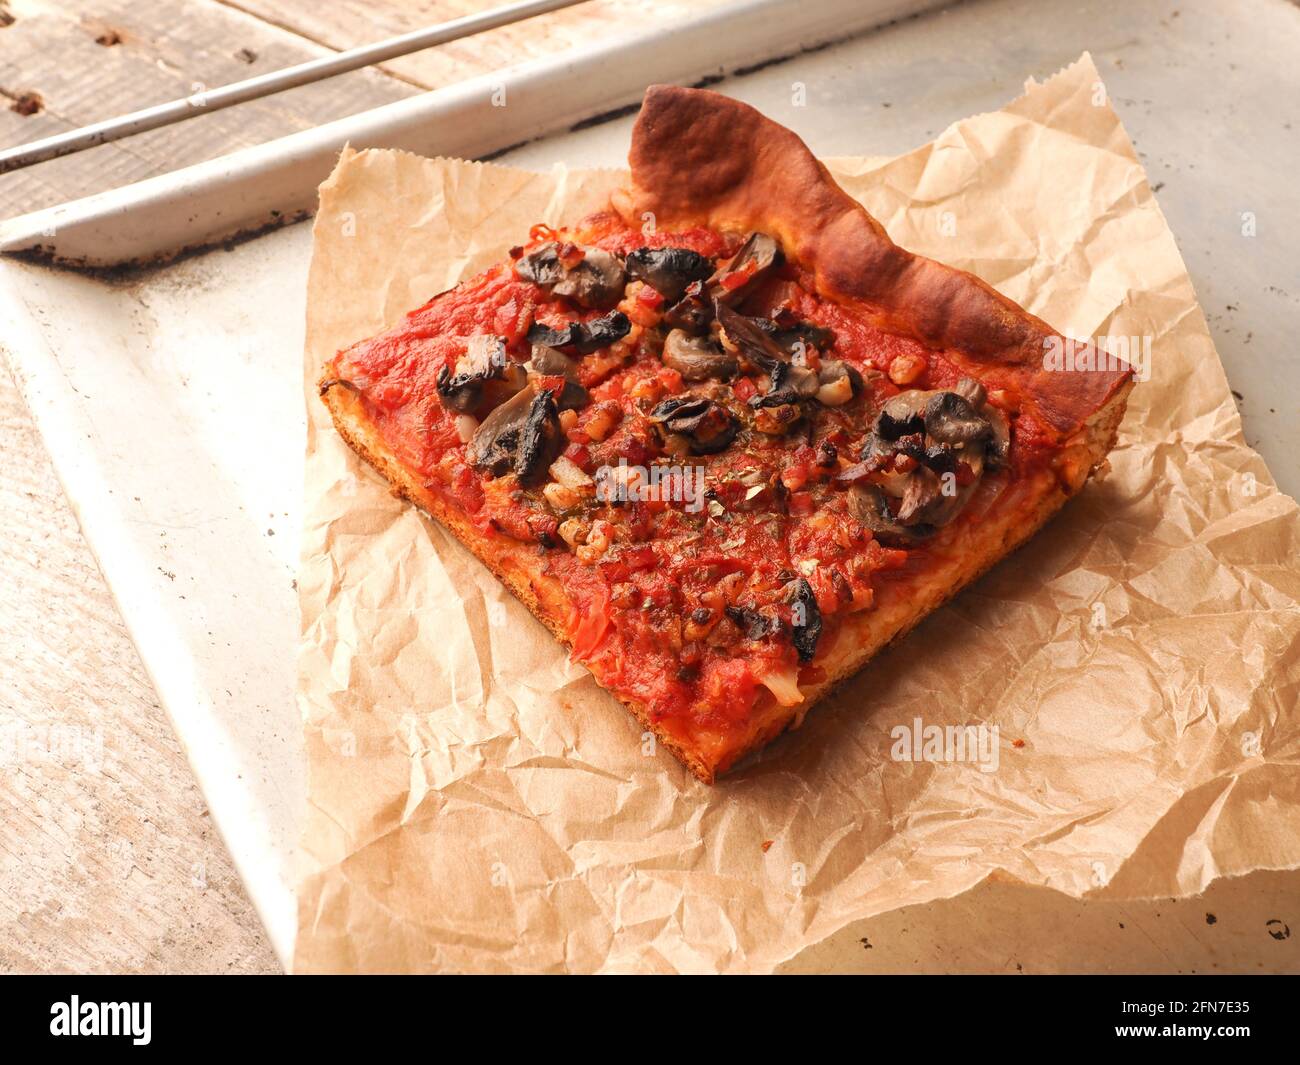 Vegetarian pizza with mushrooms, tomatoes and garlic without cheese. For people with lactose intolerance. Healthy organic food Stock Photo